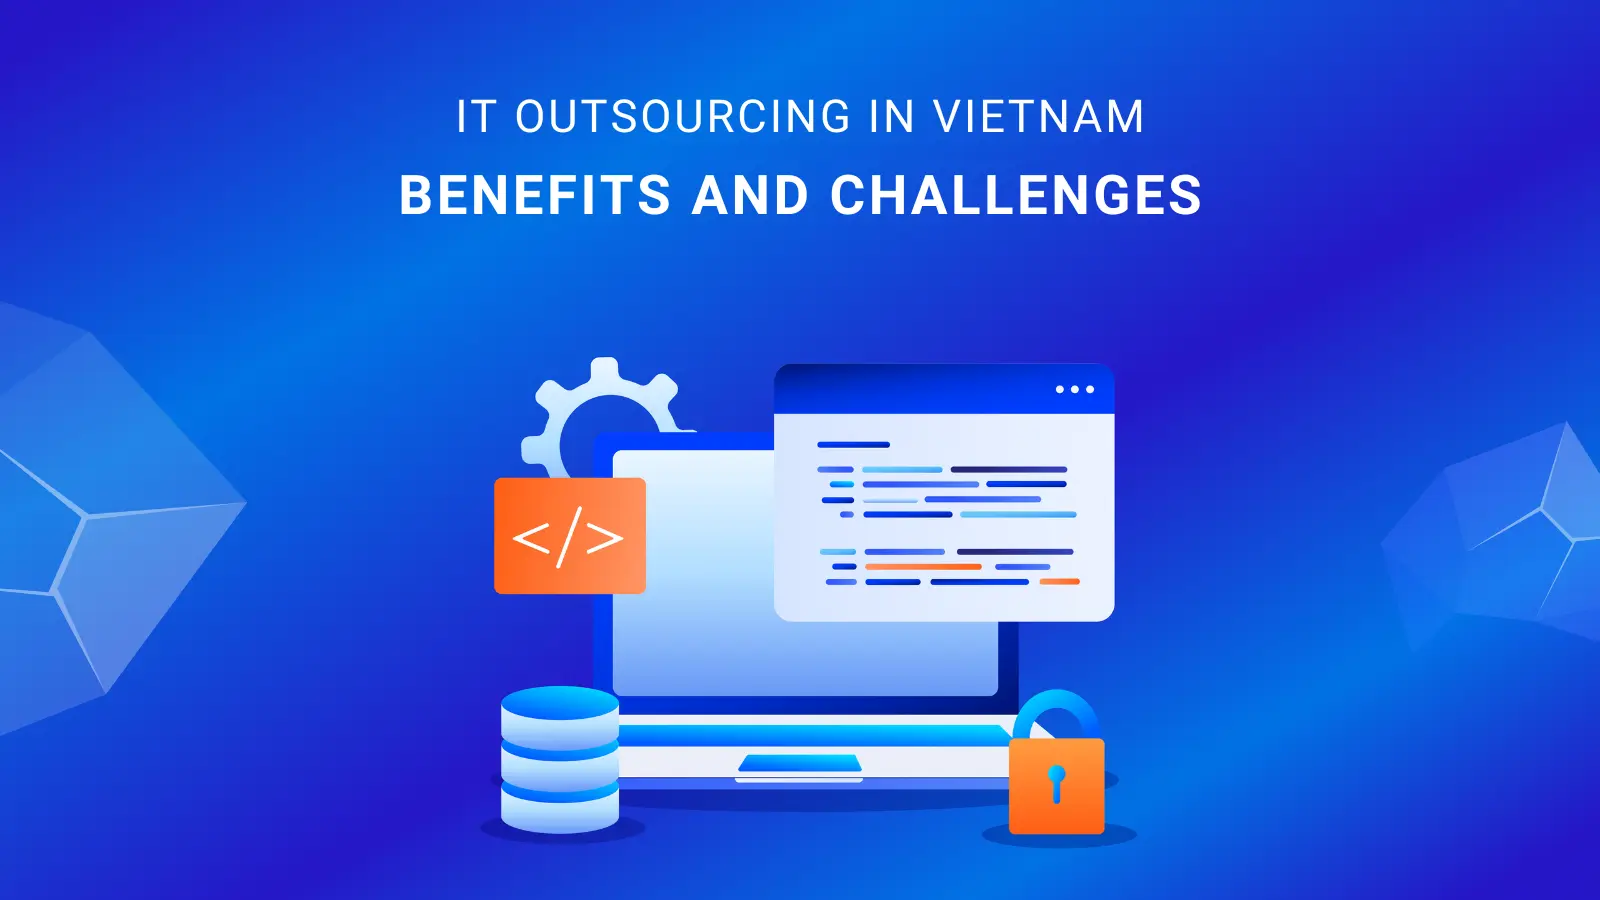 IT Outsourcing in Vietnam Benefits and Challenges